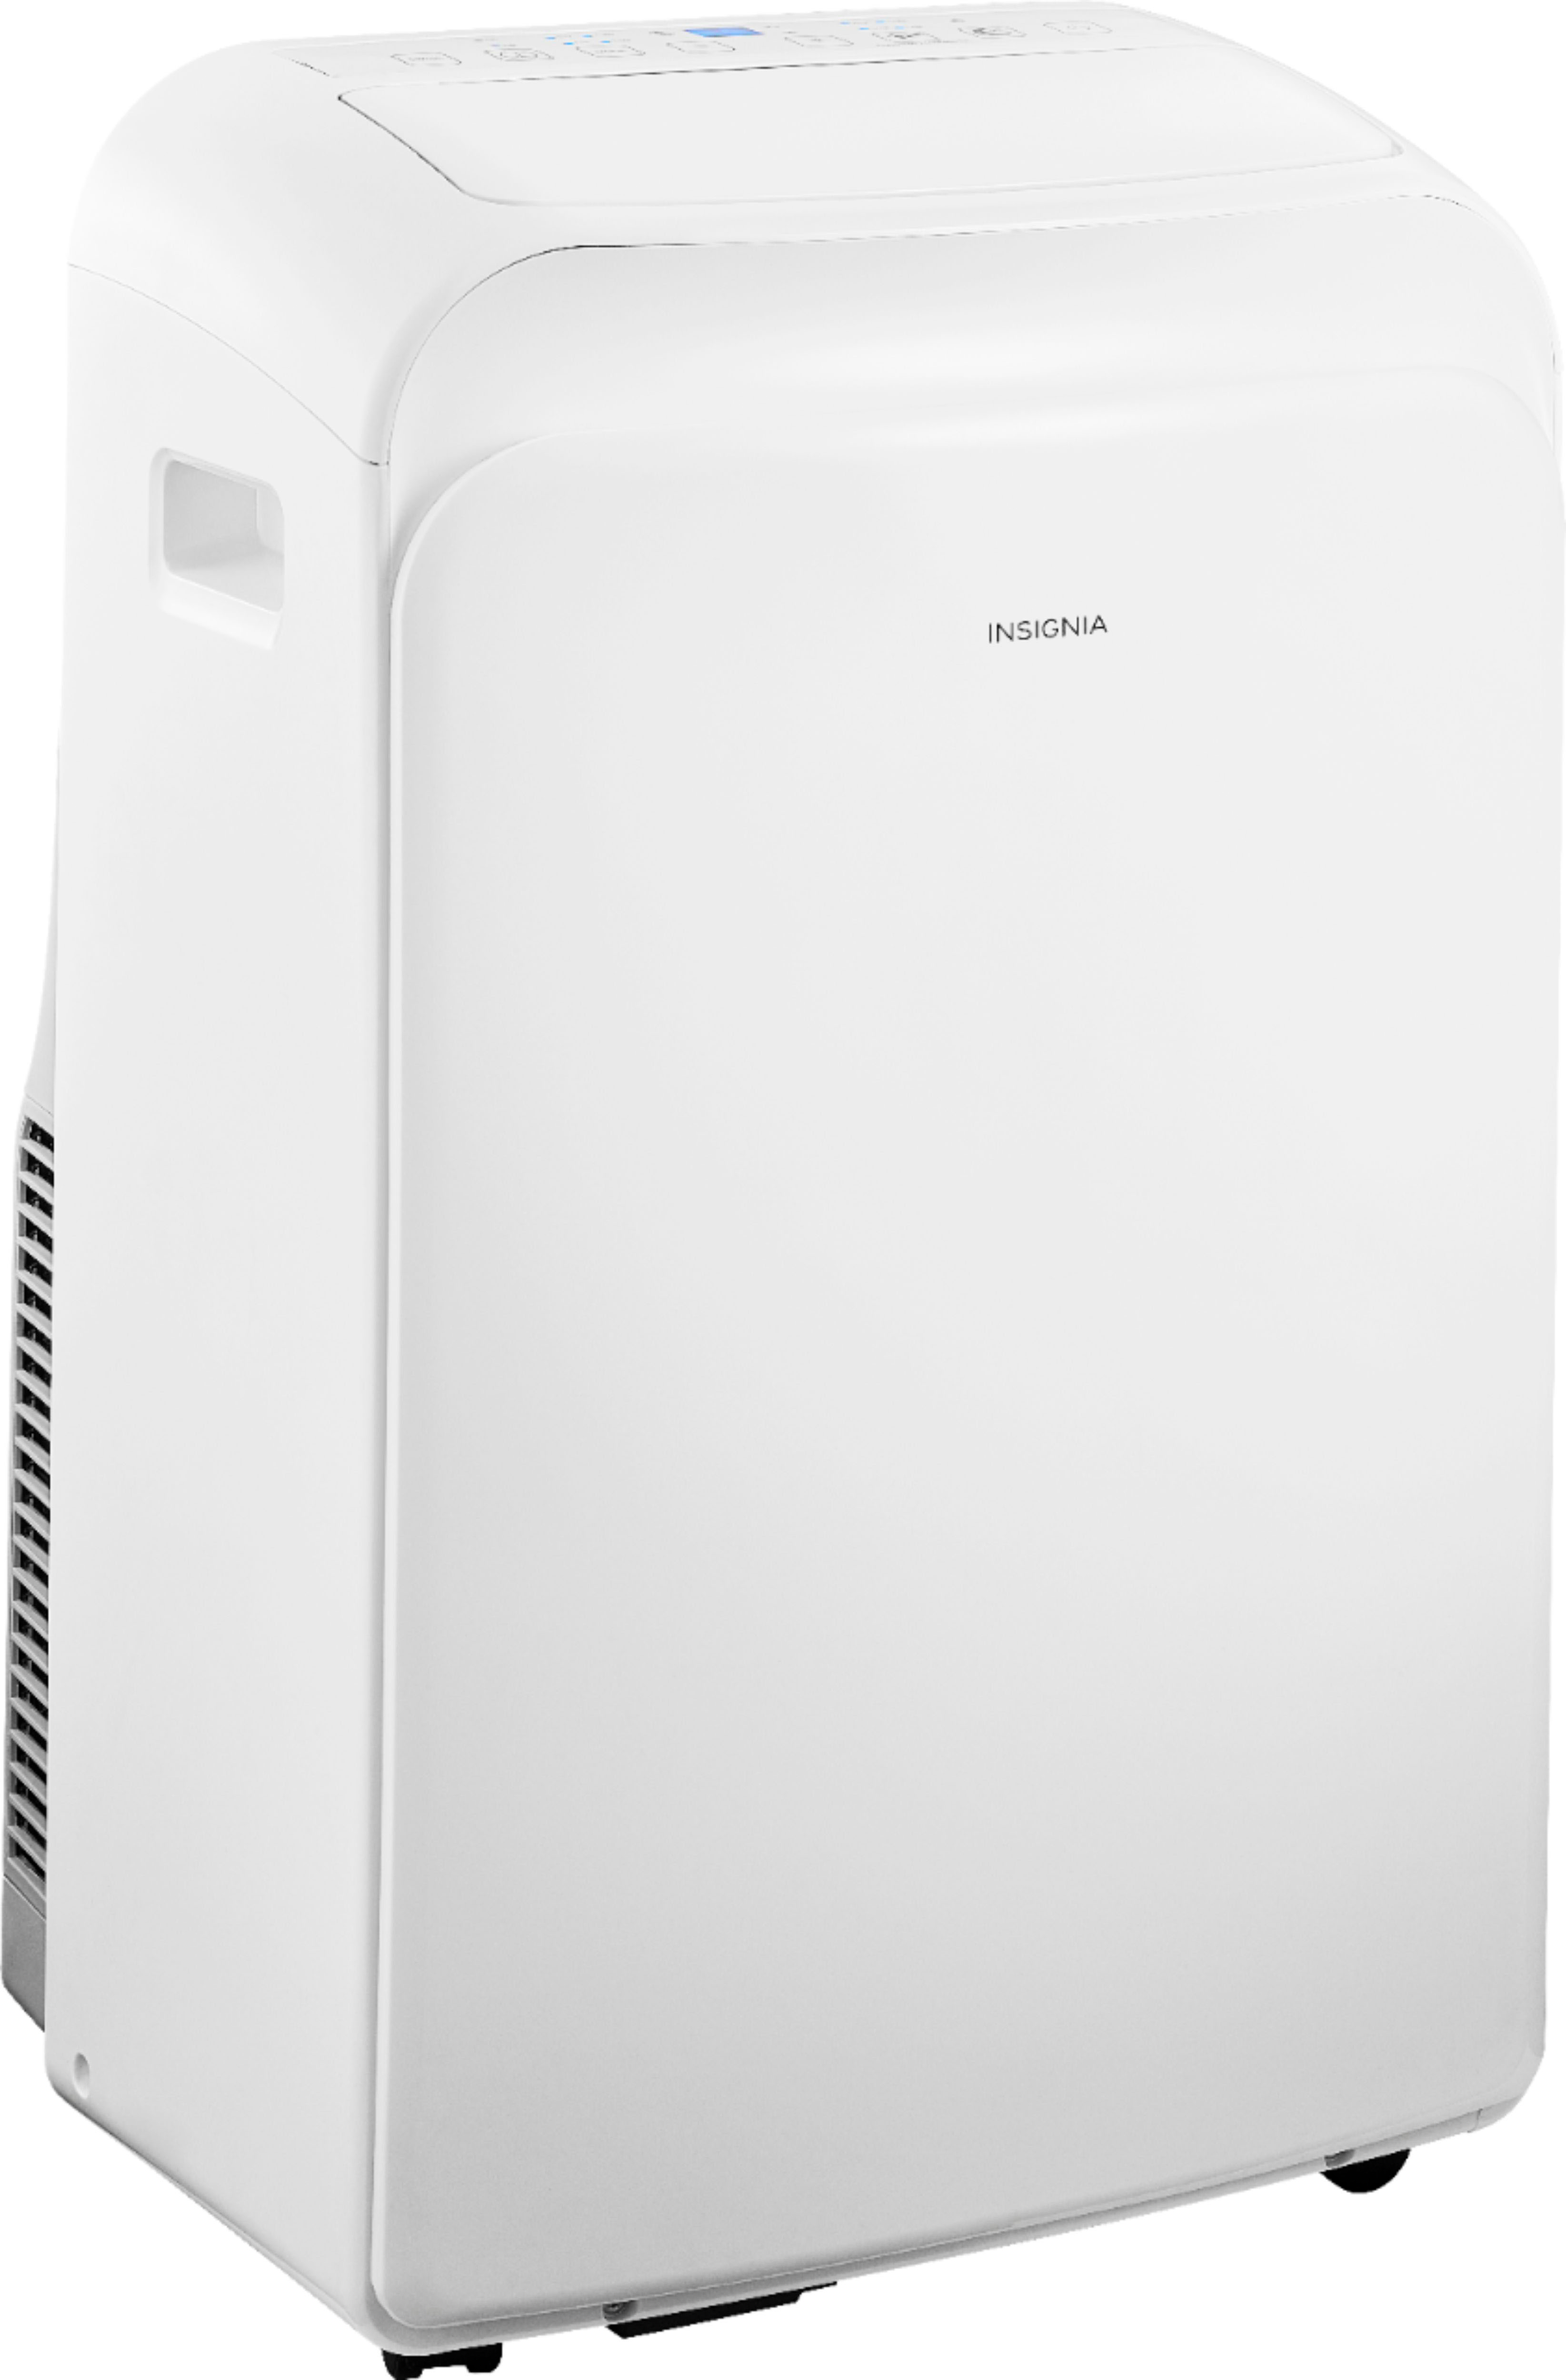 Angle View: GE - 350 Sq. Ft. 10,000 BTU Portable Air Conditioner with Remote - White